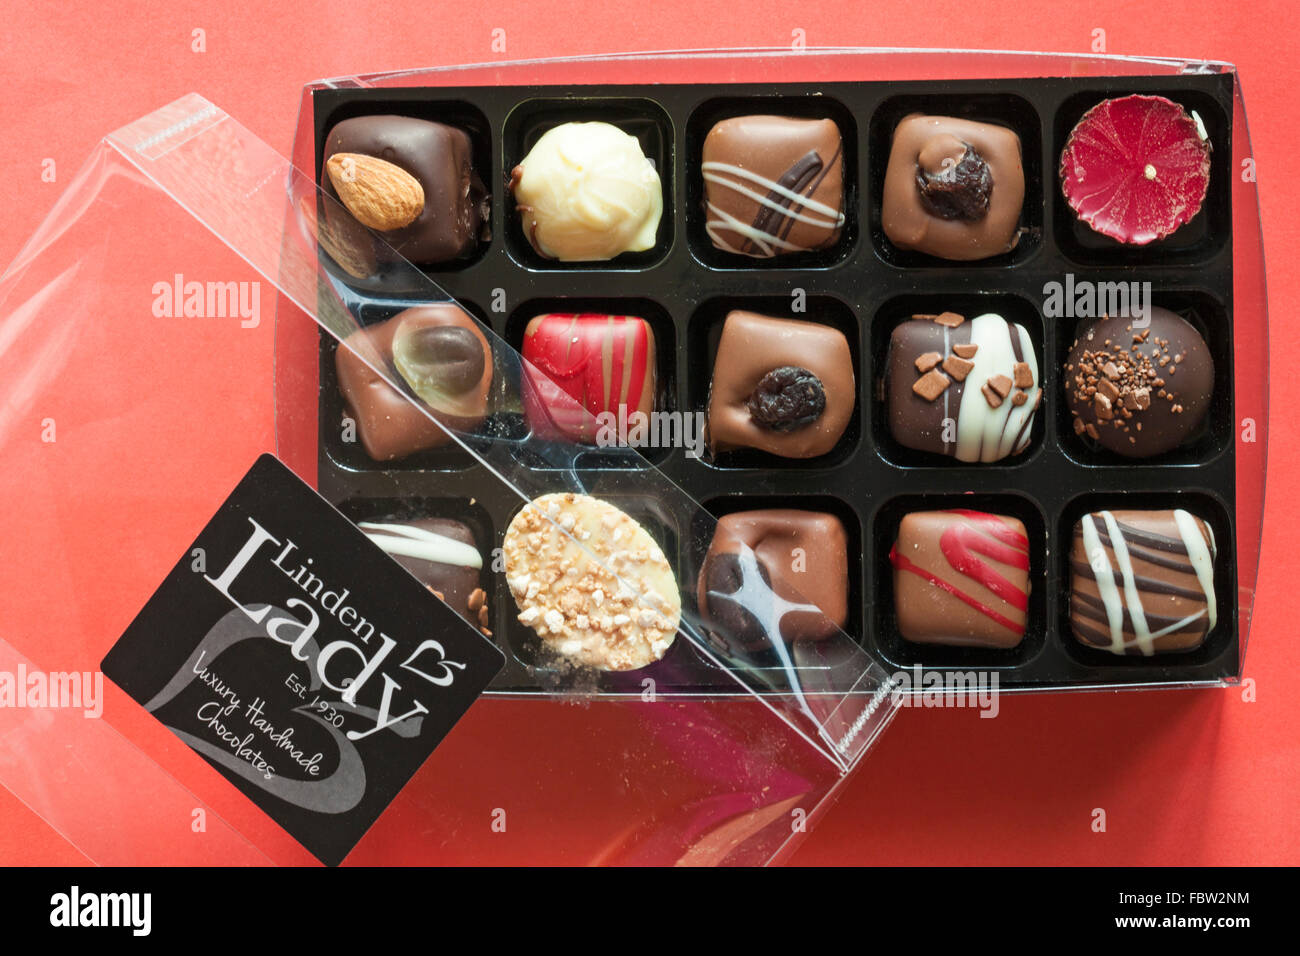 Opened box of Linden Lady luxury handmade chocolates showing contents set on red background Stock Photo